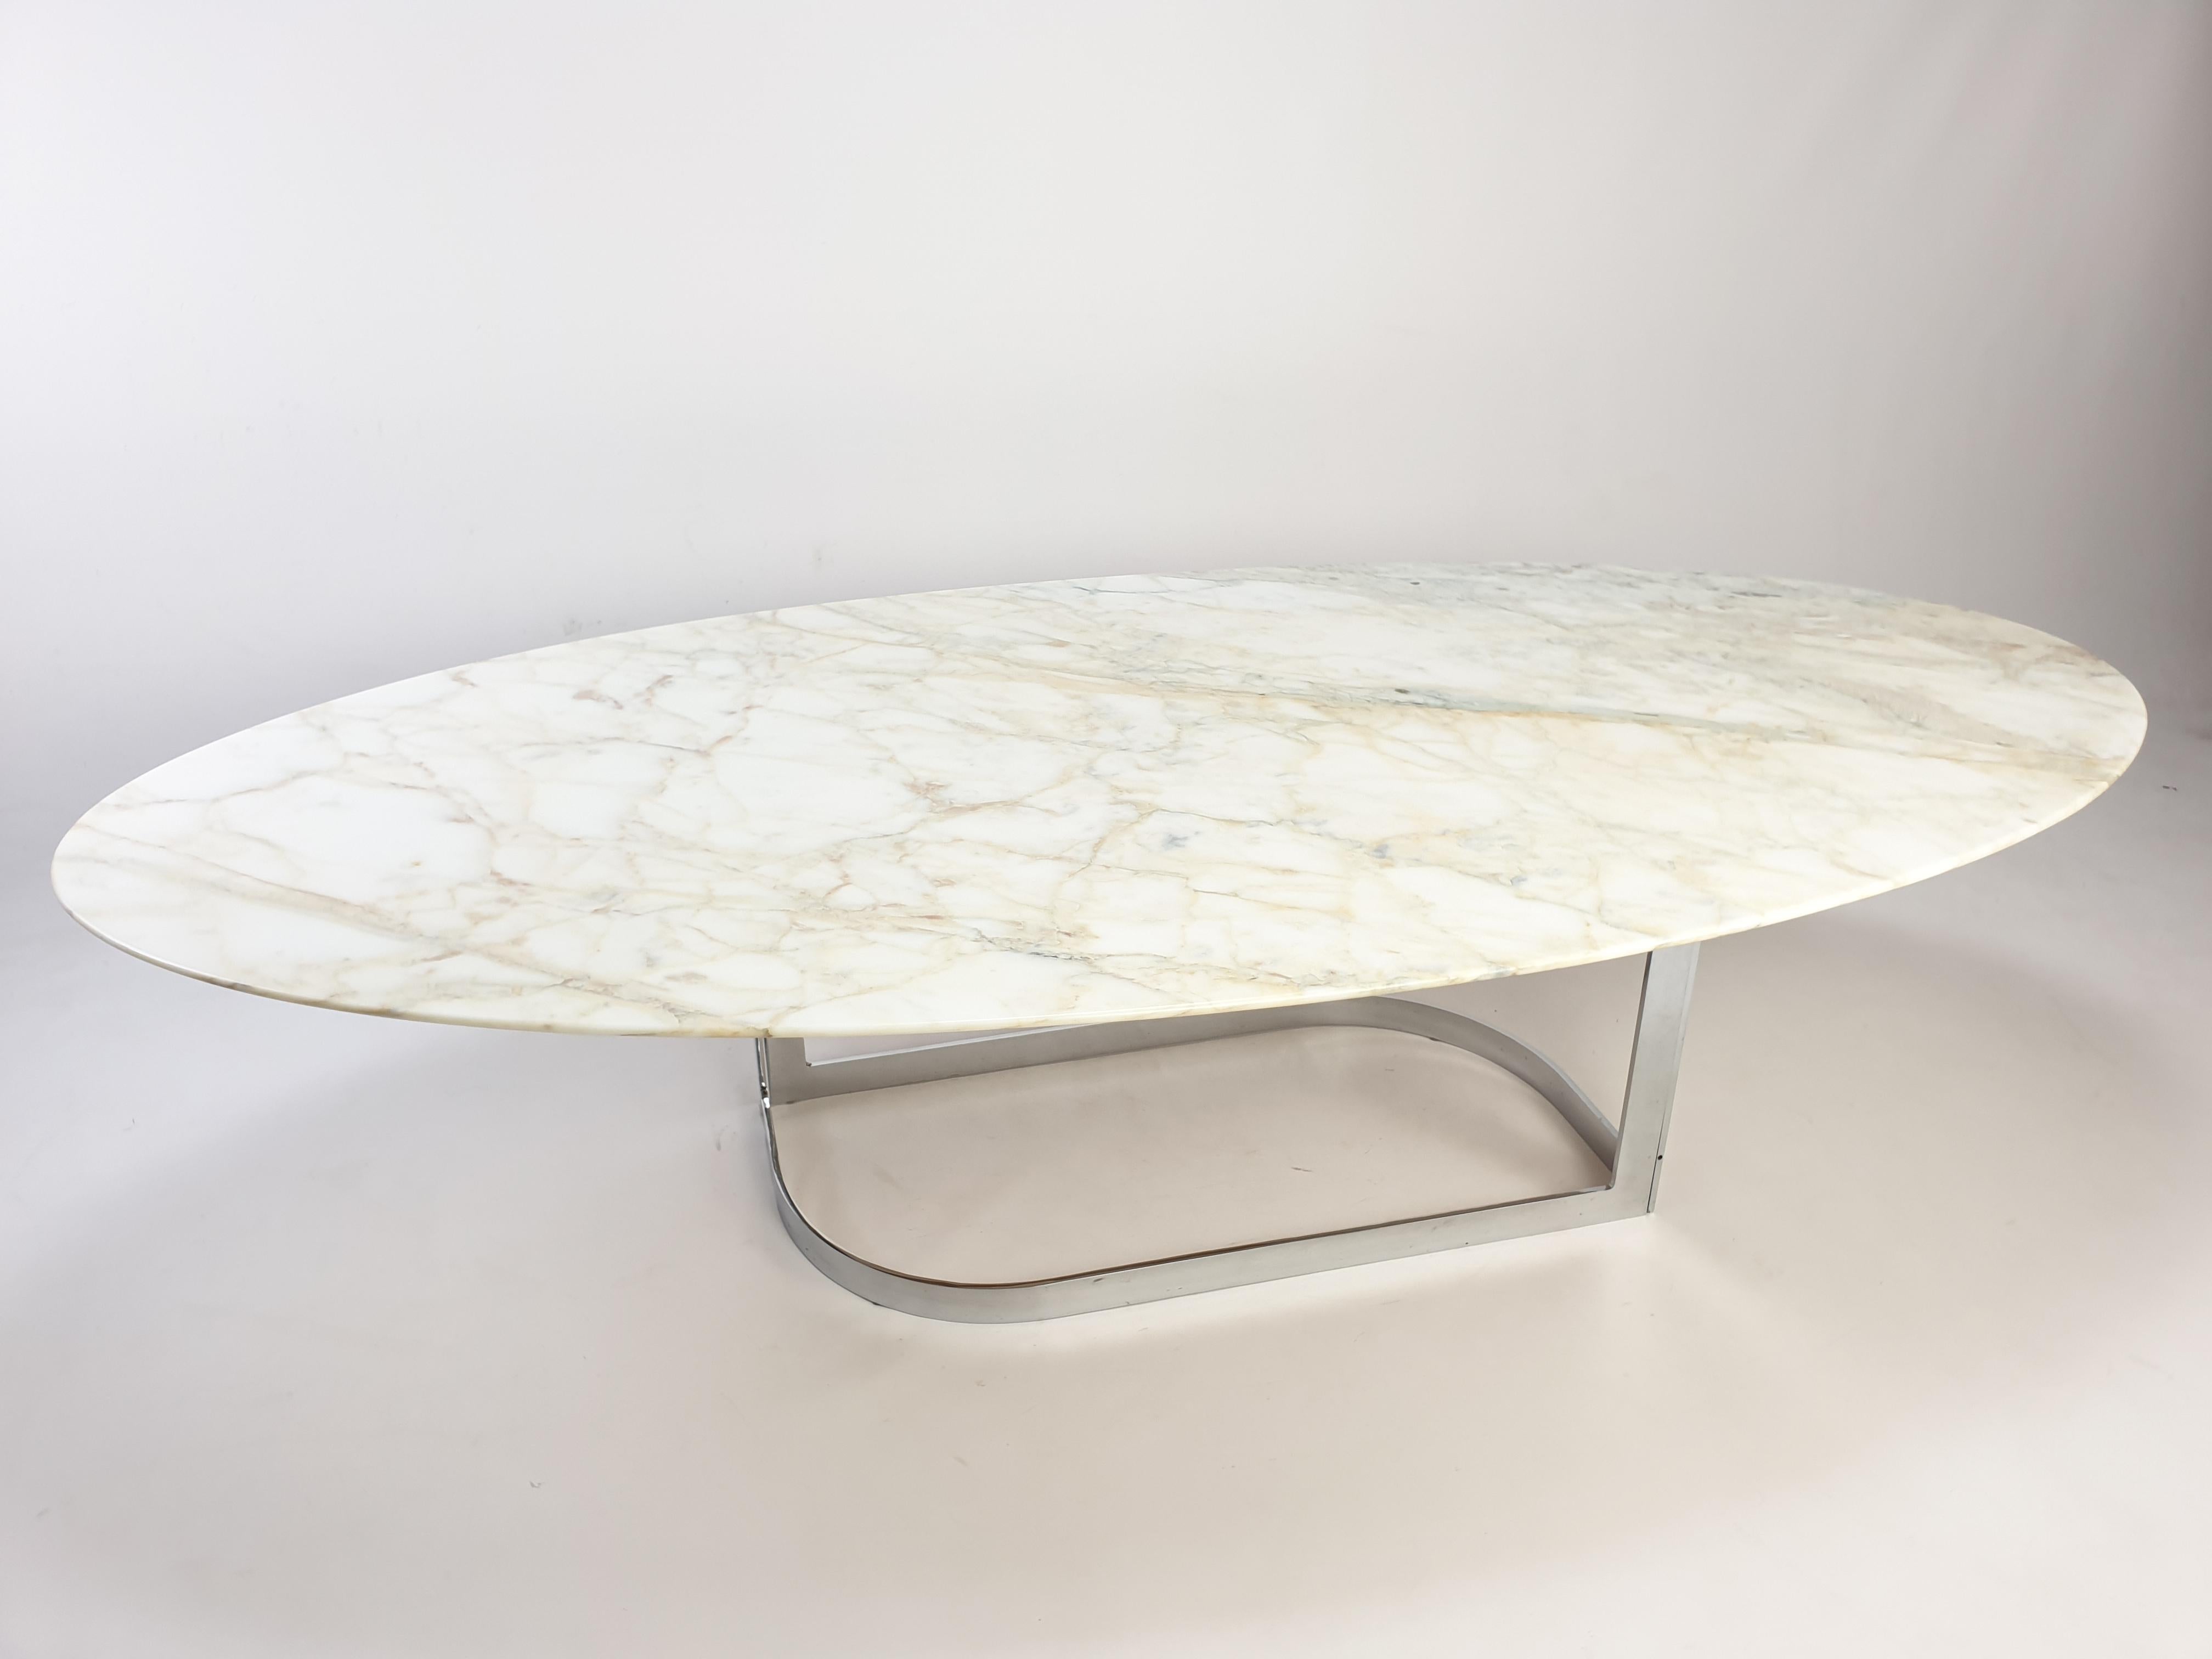 Chrome Mid-Century Marble Coffee Table by Roche Bobois, 1970s